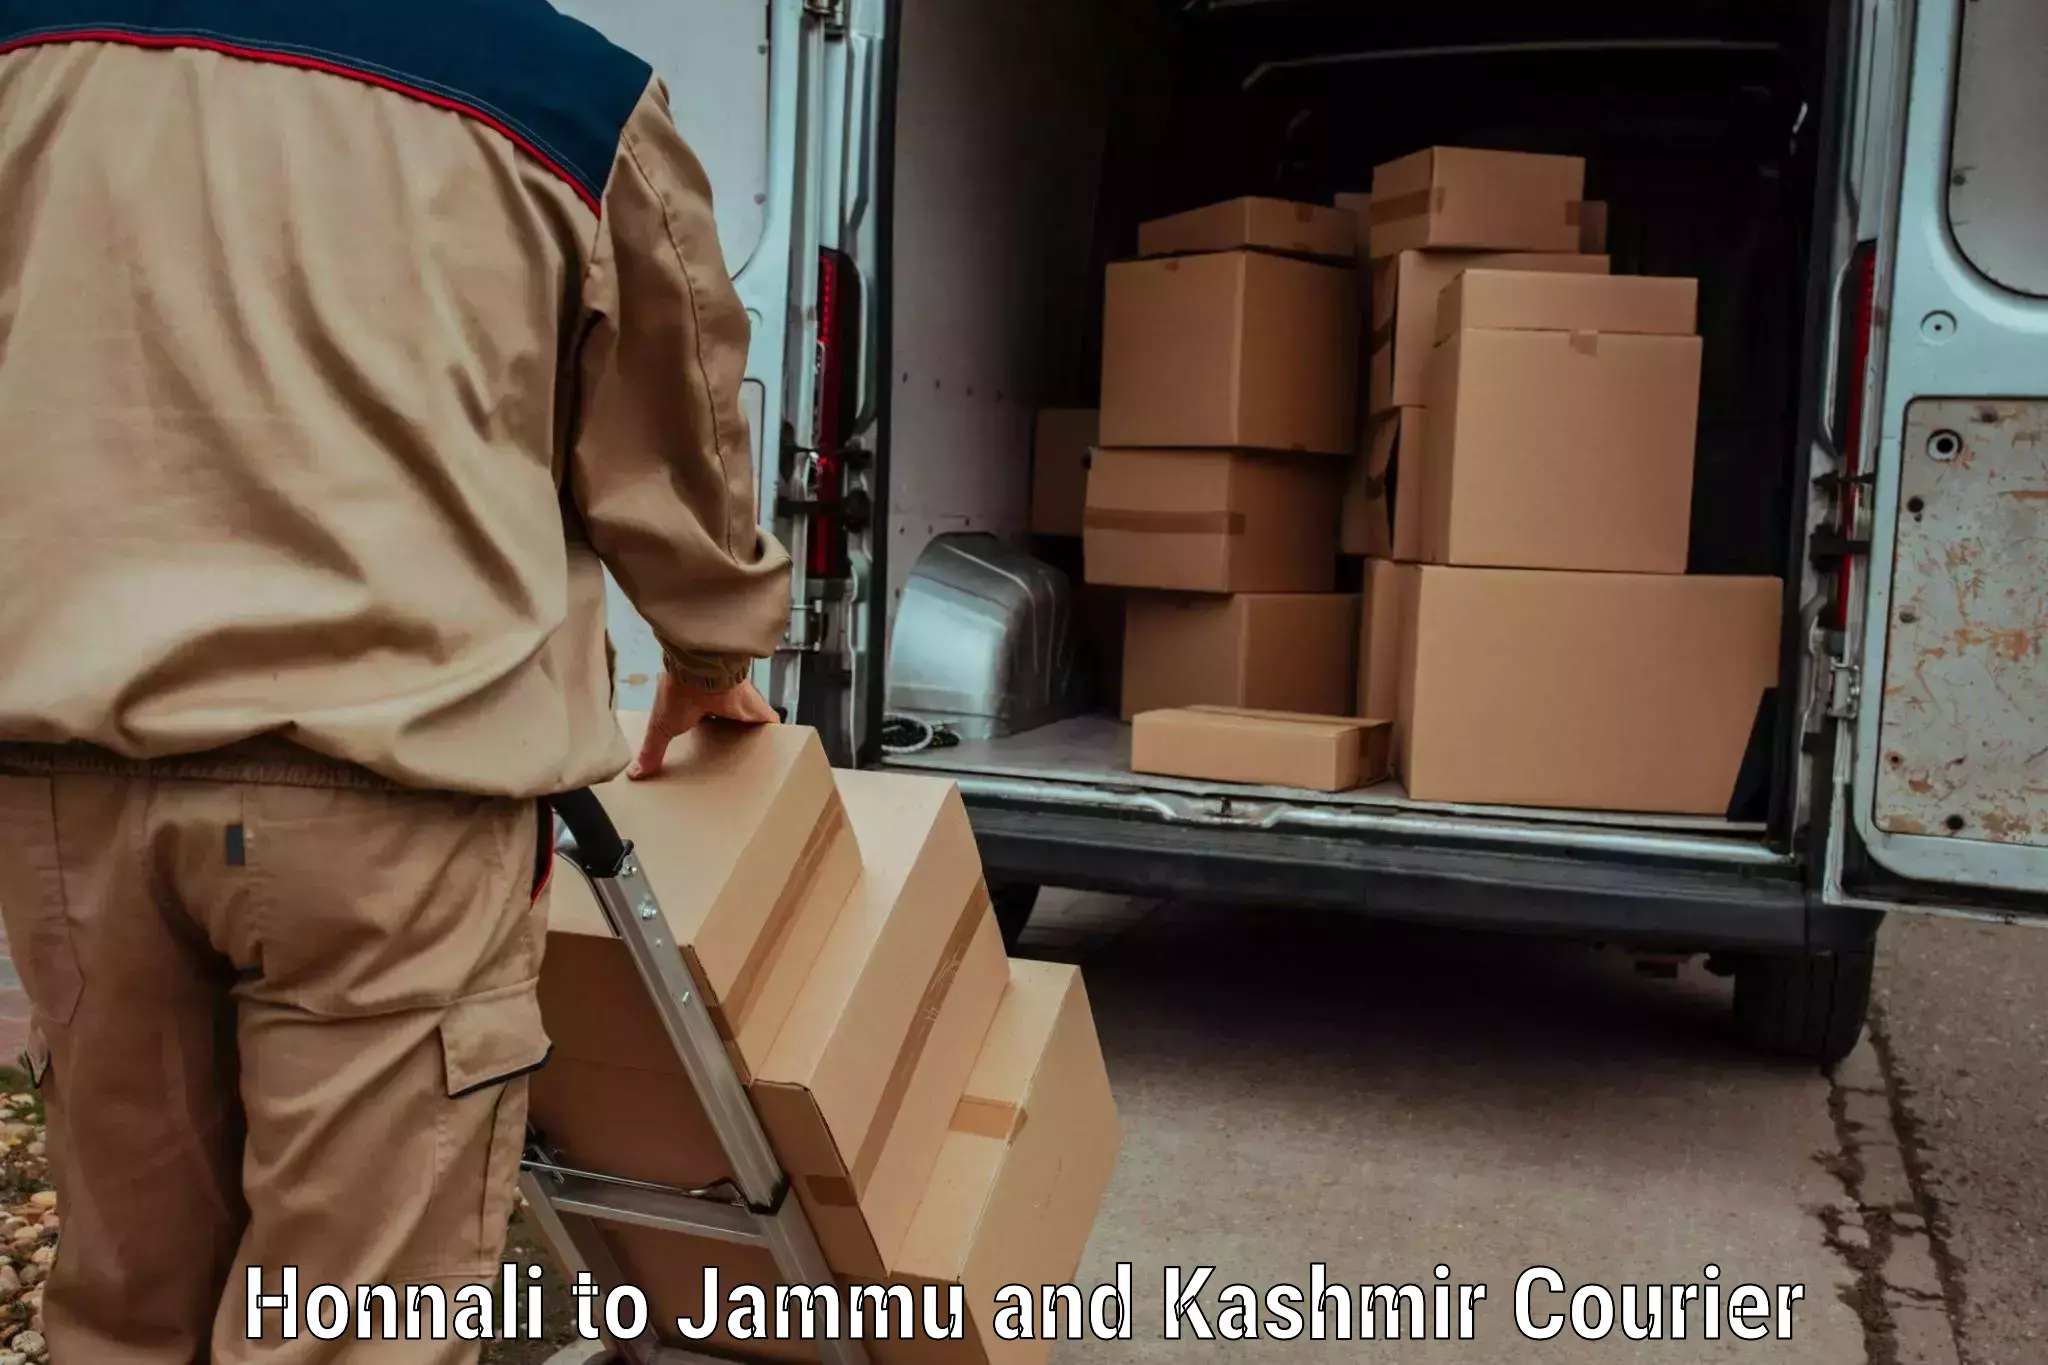 Express delivery capabilities Honnali to Leh